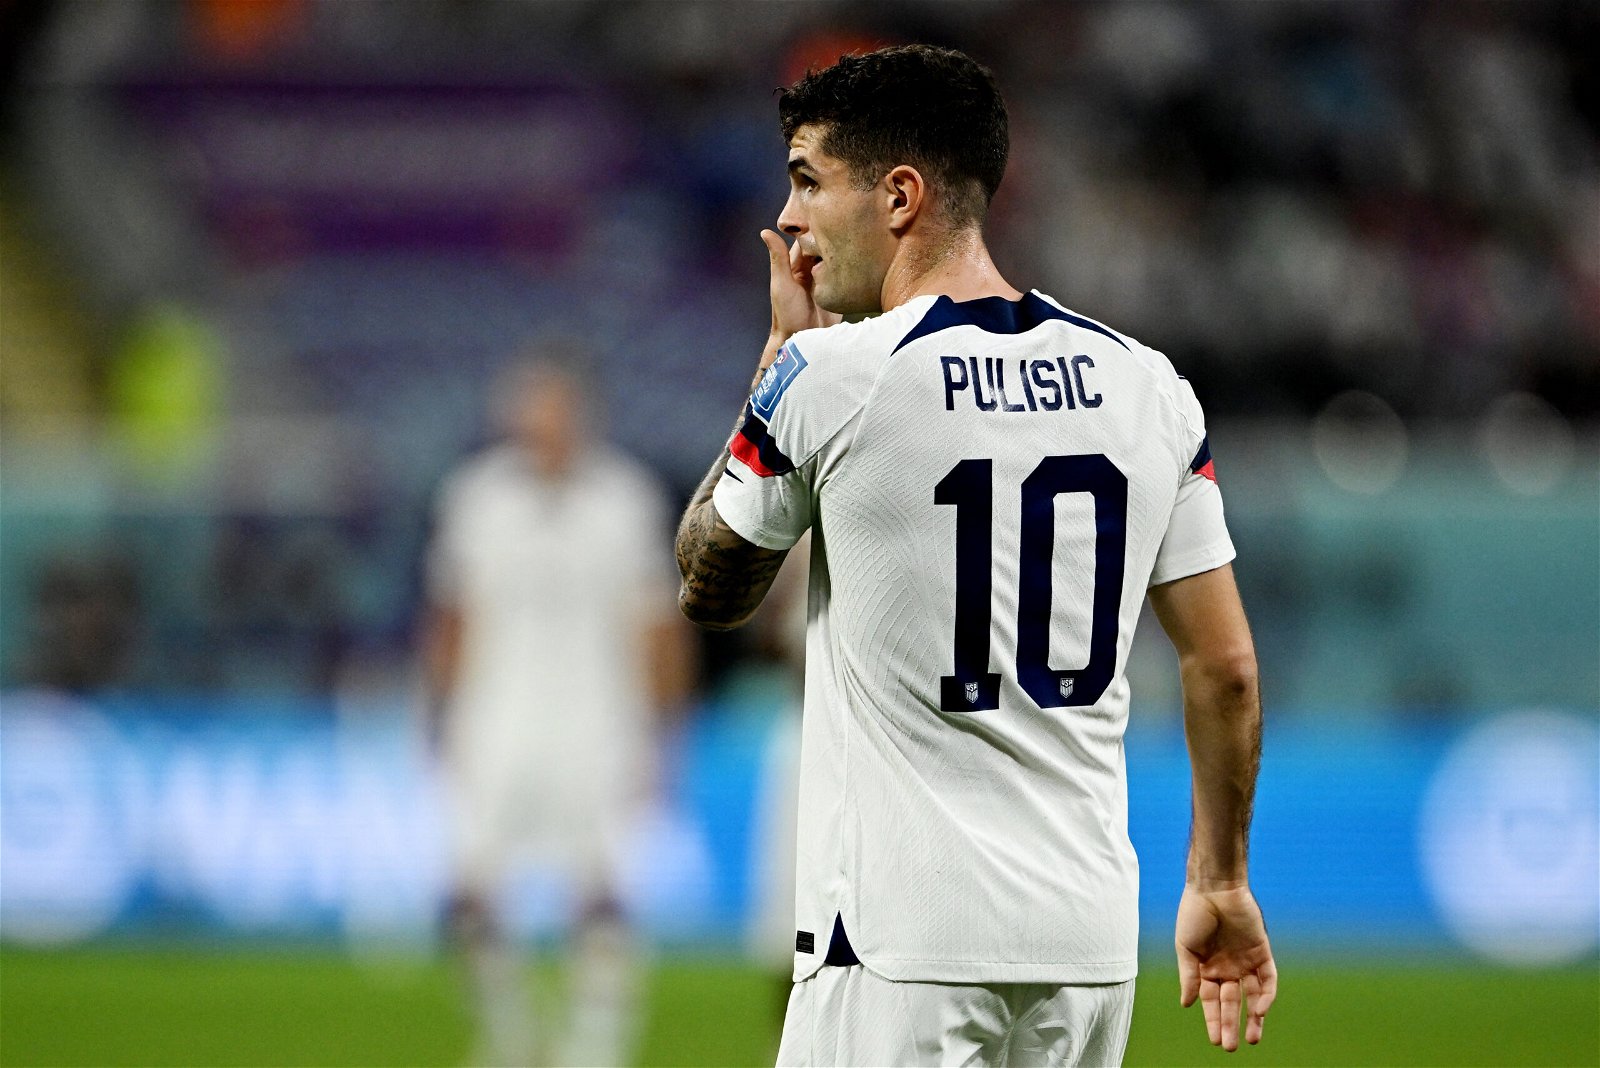 Christian Pulisic is one of the key players in the USMNT Copa America Squad